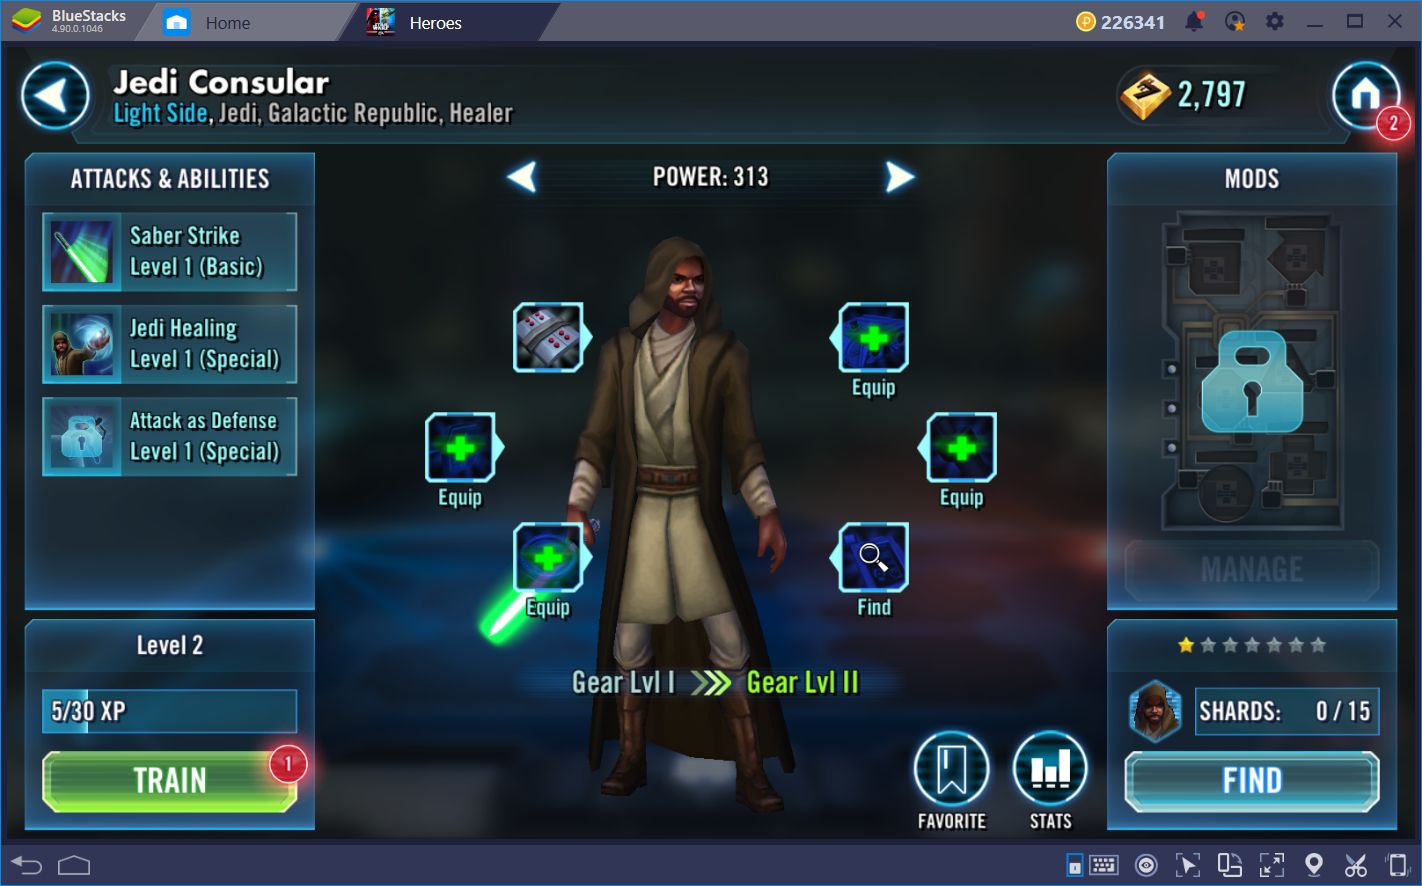 Combat Guide for Star Wars: Galaxy of Heroes